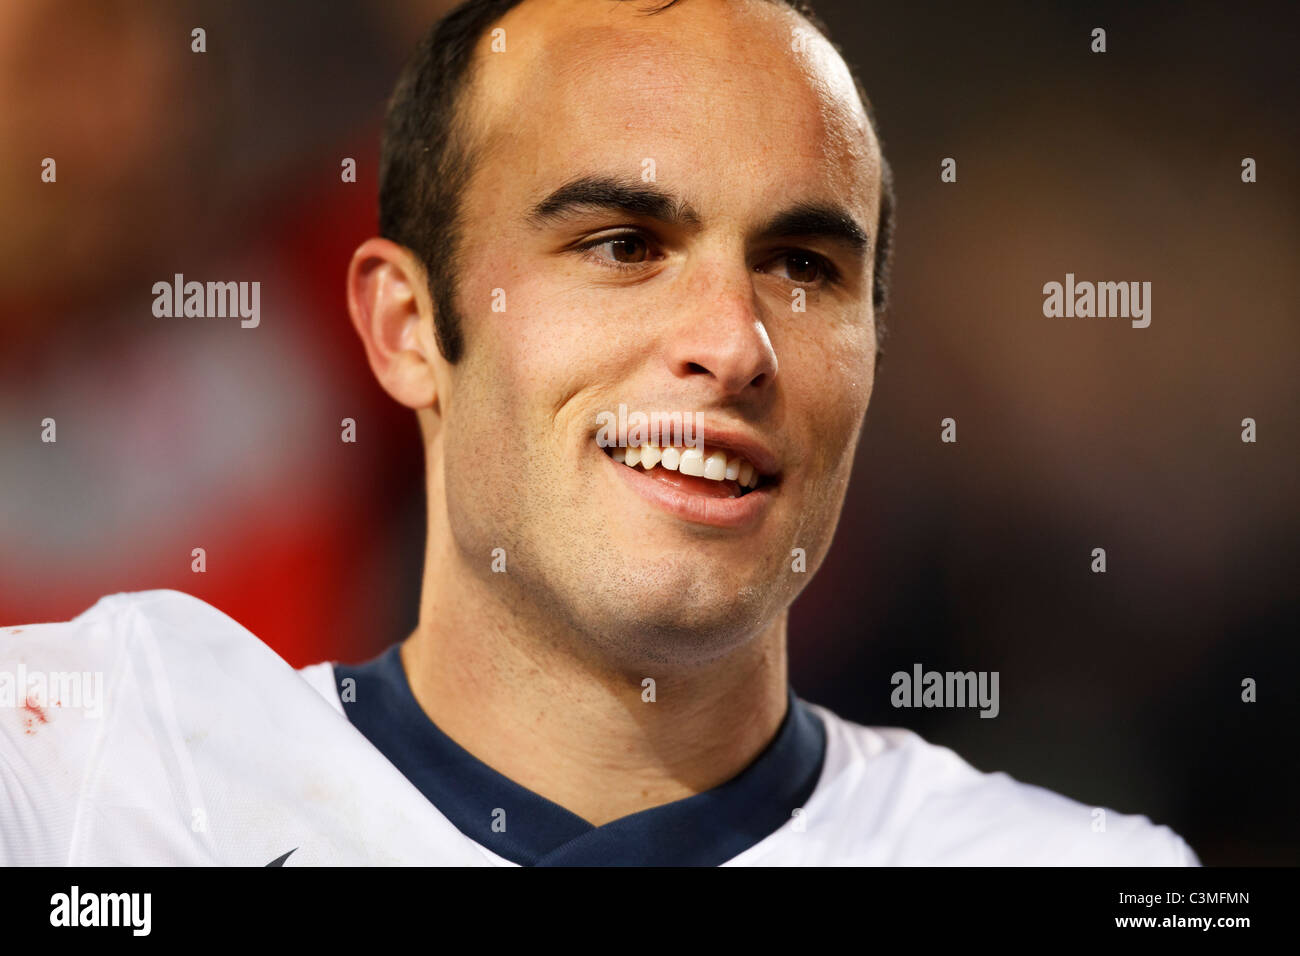 Landon Donovan of the United States smiles after a World Cup match in which he scored a dramatic late goal to defeat Algeria. Stock Photo